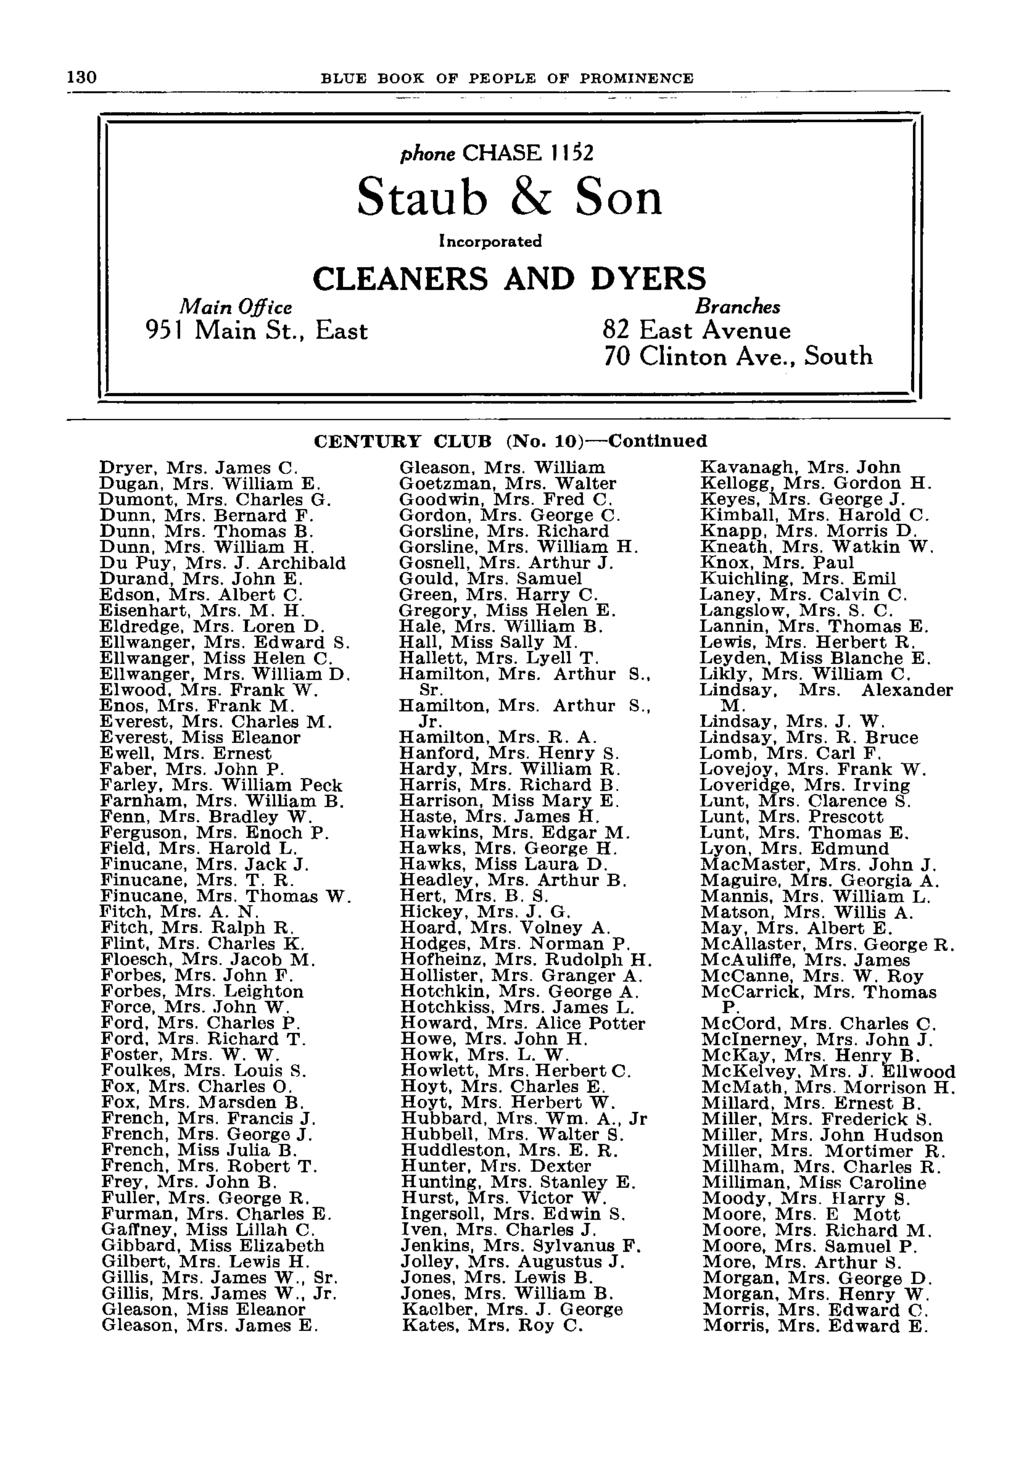 BLUE BOOK OF PEOPLE OP PROMINENCE Main Office 951 Main St., East phone CHASE II52 Staub & Son I ncorporated CLEANERS AND DYERS Branches 82 East Avenue 70 Clinton Ave., South Dryer, Mrs. James C.